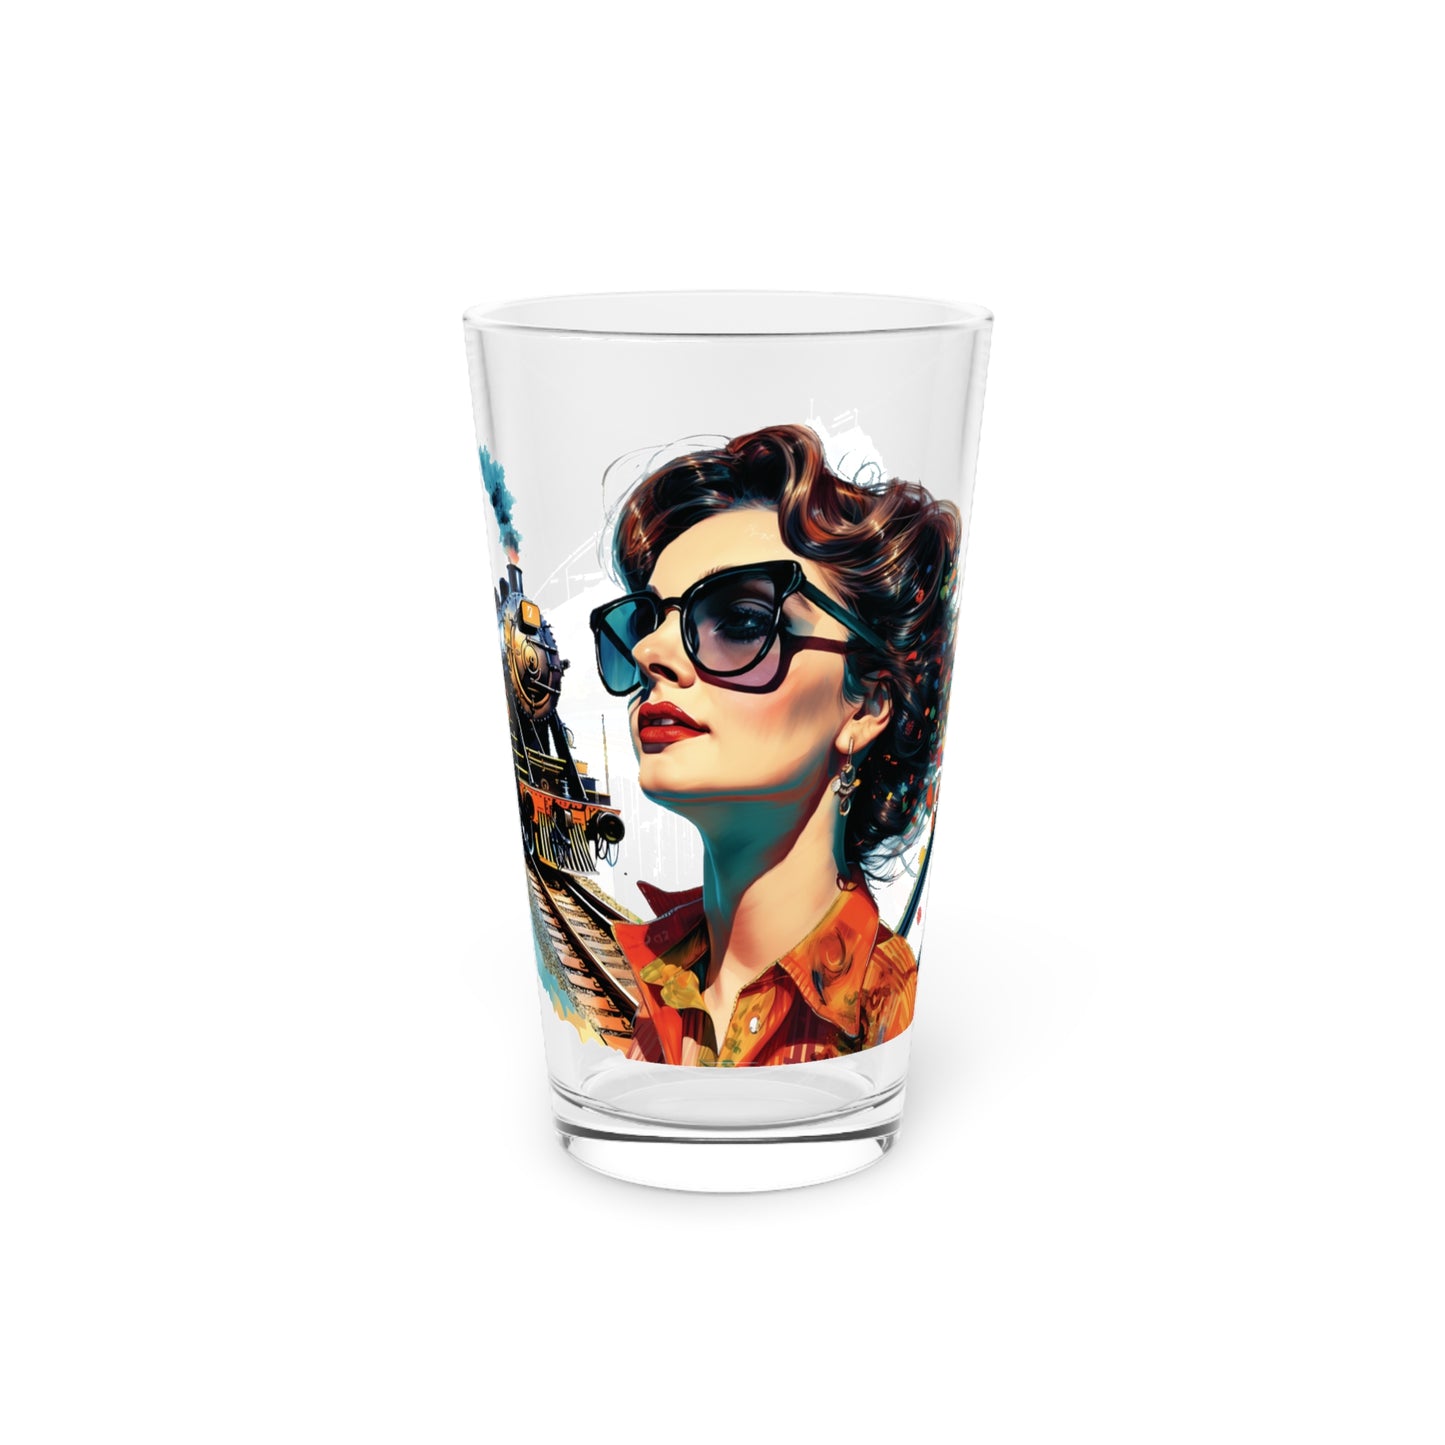 Experience the magic of a colorful voyage with our Woman and Train Pint Glass. The fusion of bold hues and detailed imagery makes this glass a captivating addition to your collection. #TravelArt #StashboxGlassware